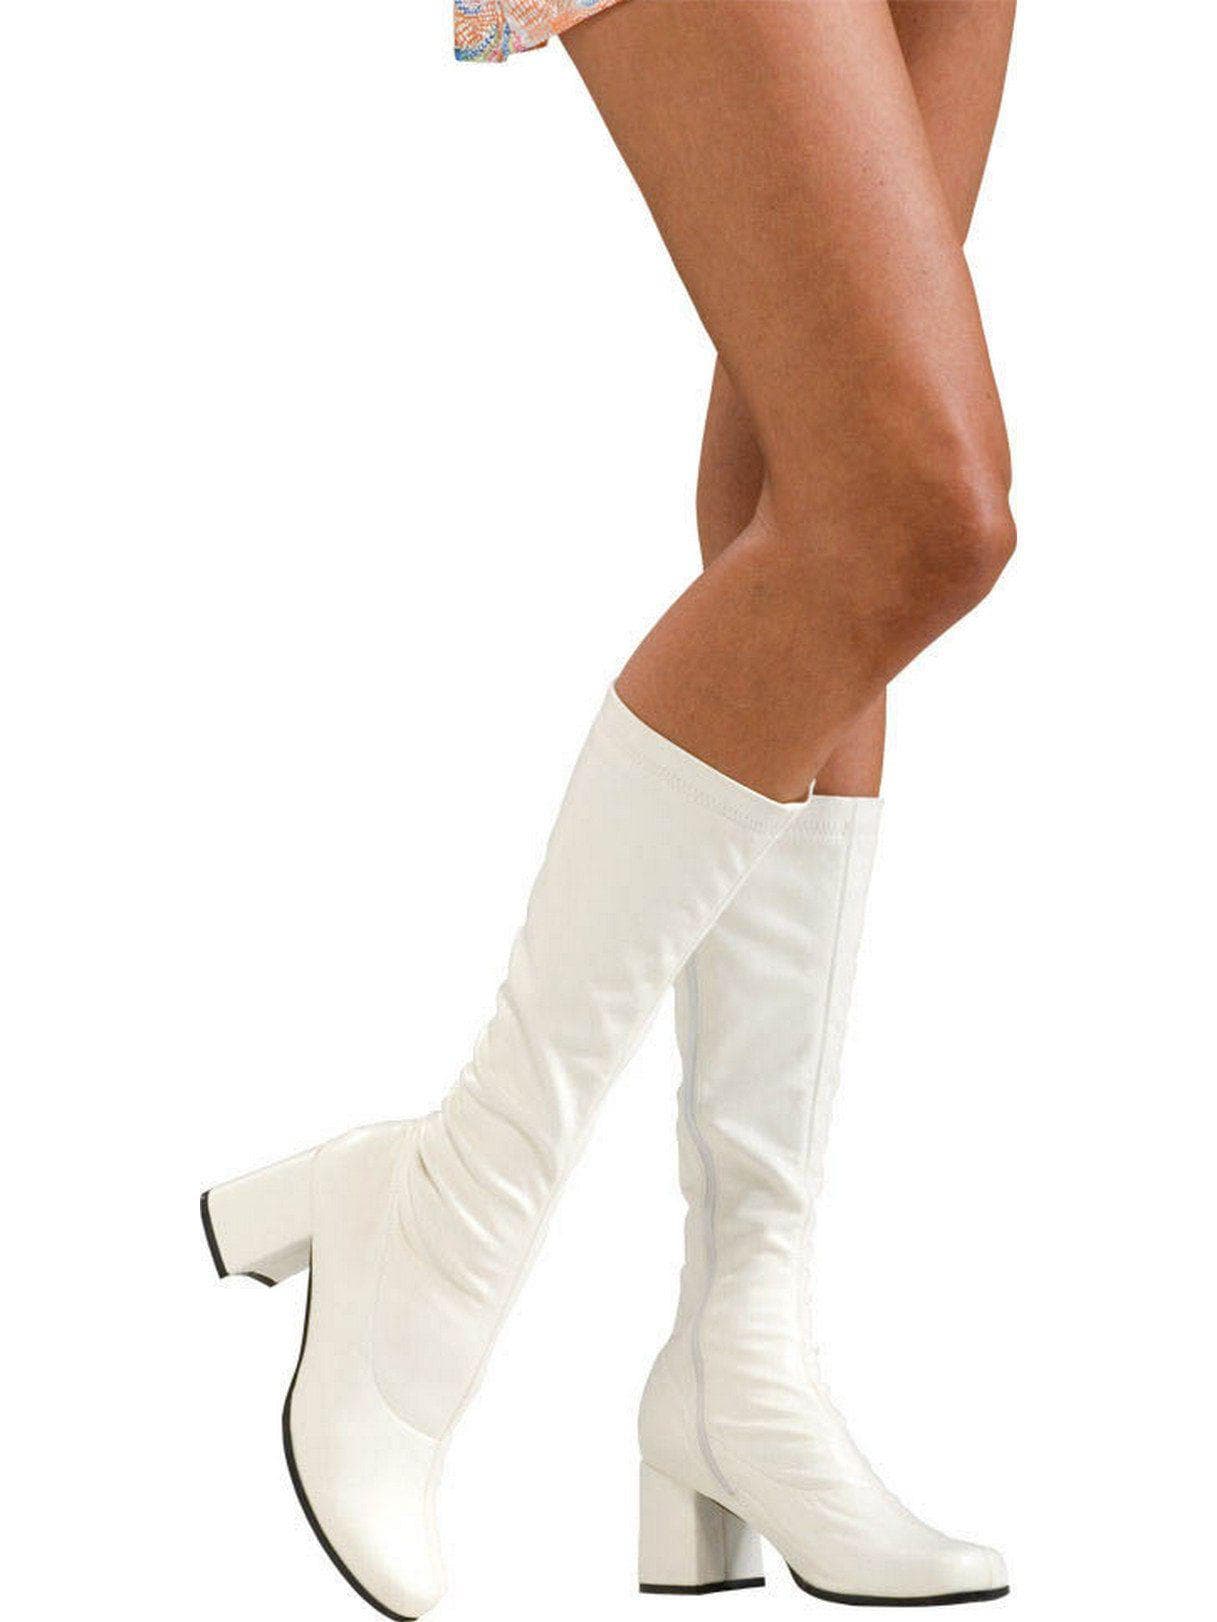 Adult White Patent Go Go Heeled Boots - costumes.com